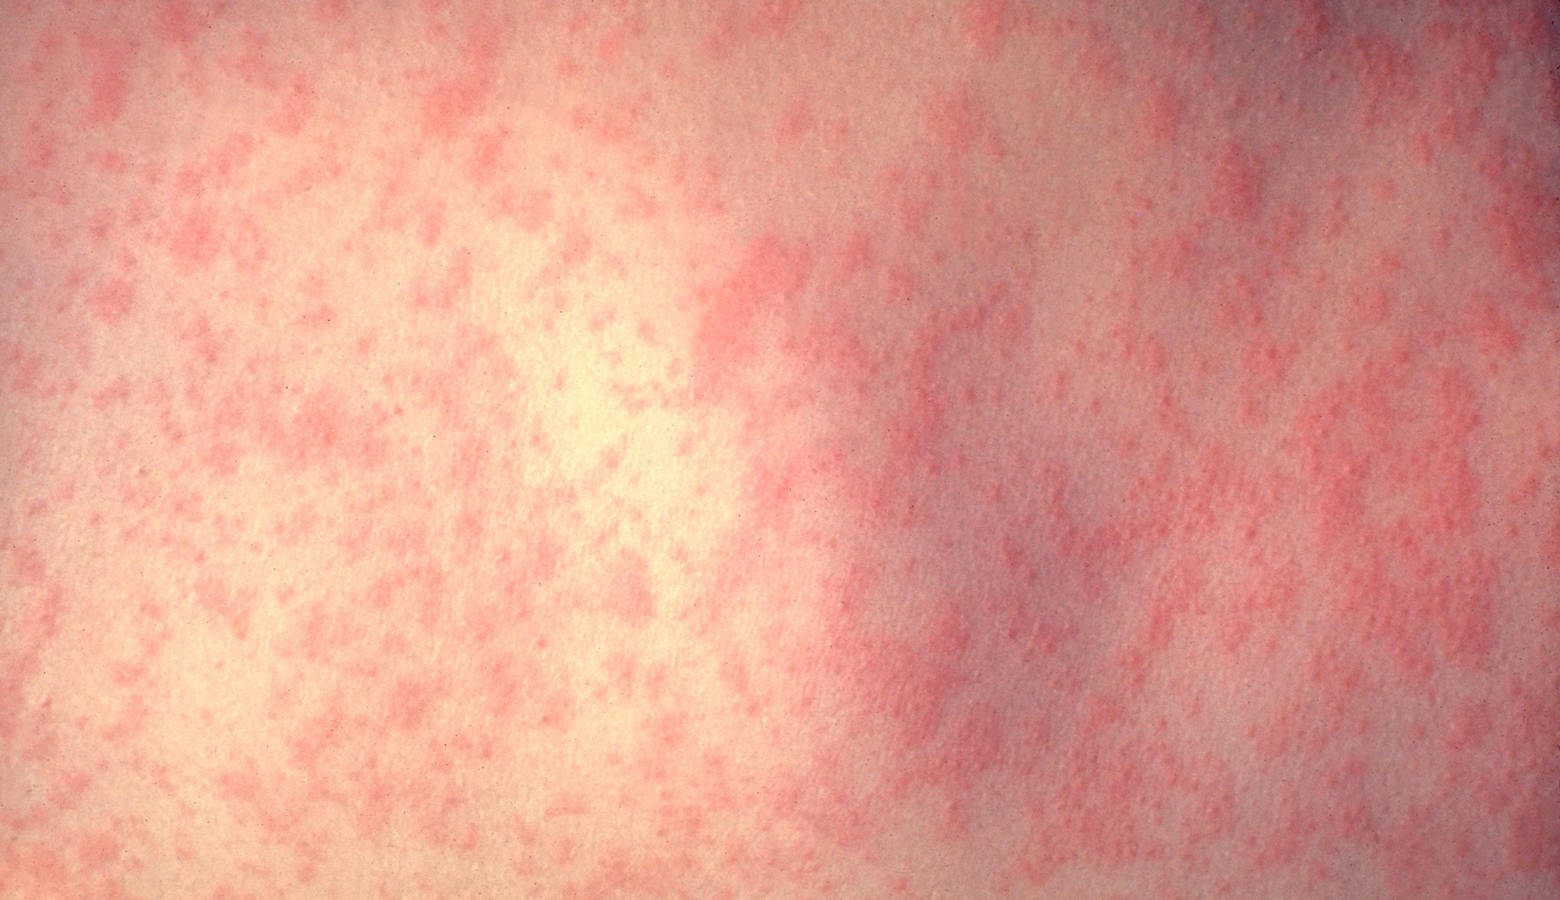 A rash forms on a person with measles three to five days after they contract the virus. (Centers for Disease Control and Prevention)